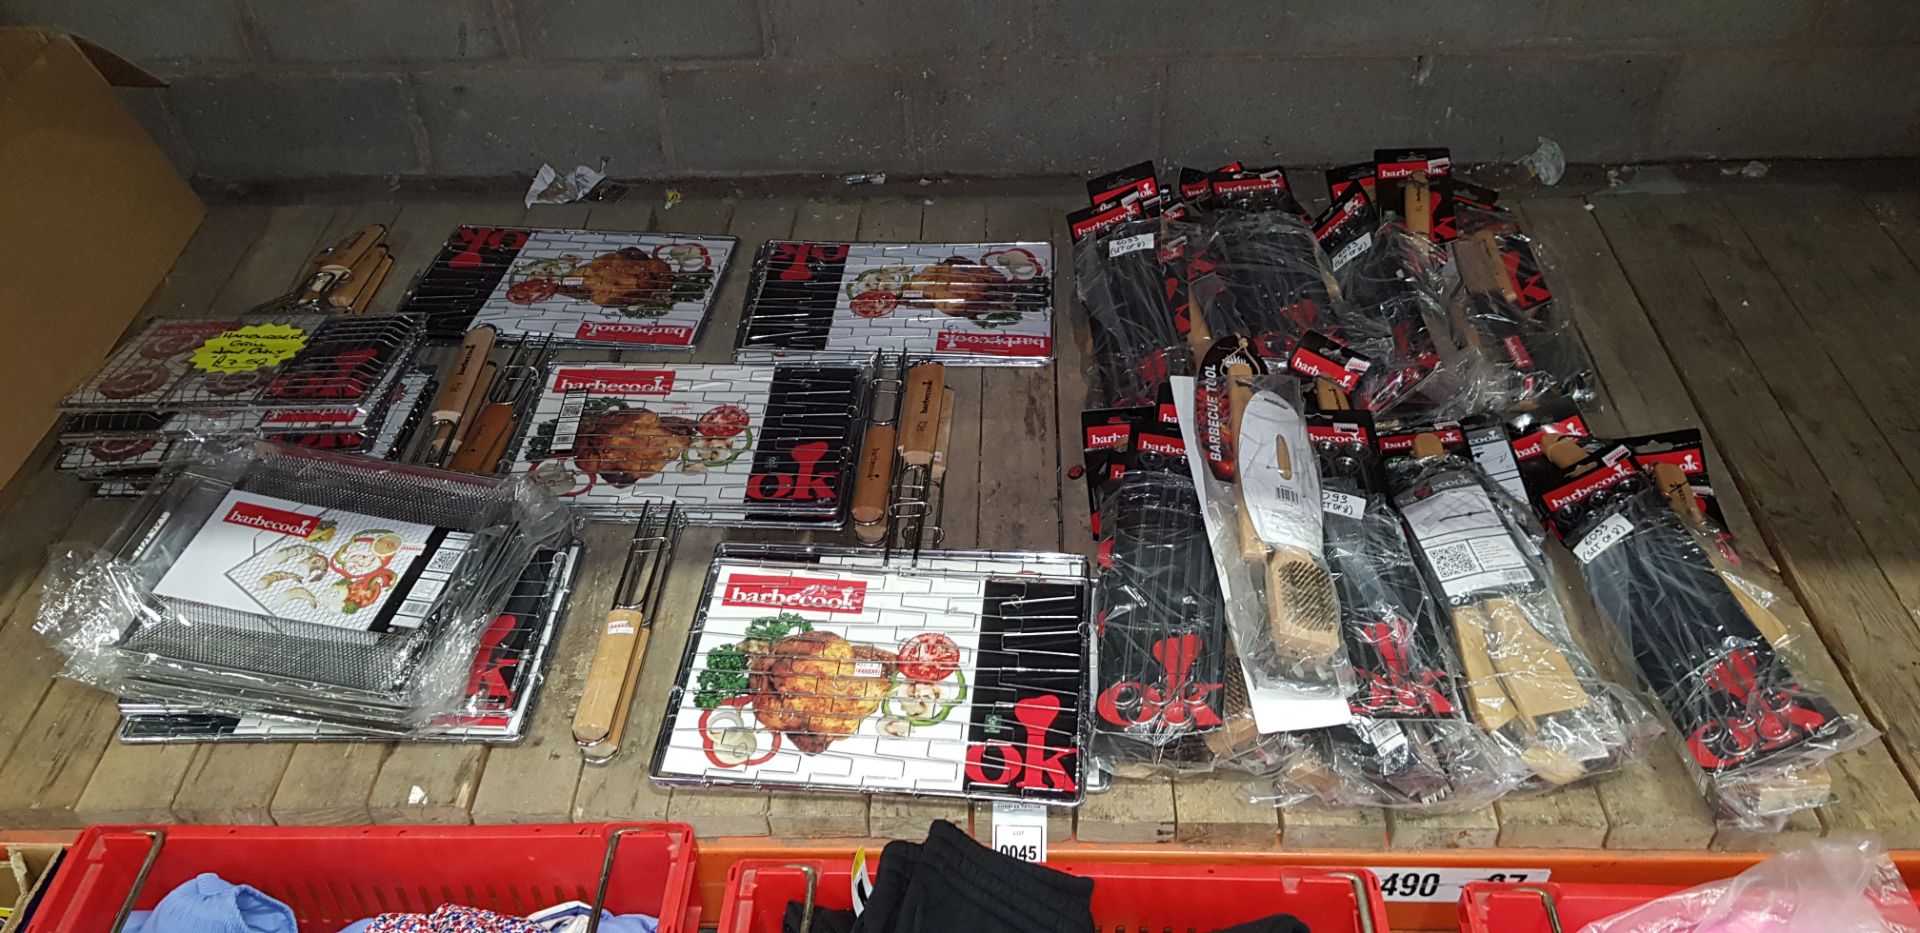 75+ BRAND NEW MIXED LOT TO INCLUDE - BBQ TOOL KIT - BARBECOOK BBQ UTENSILS - BARBECOOK GRILL BASKETS